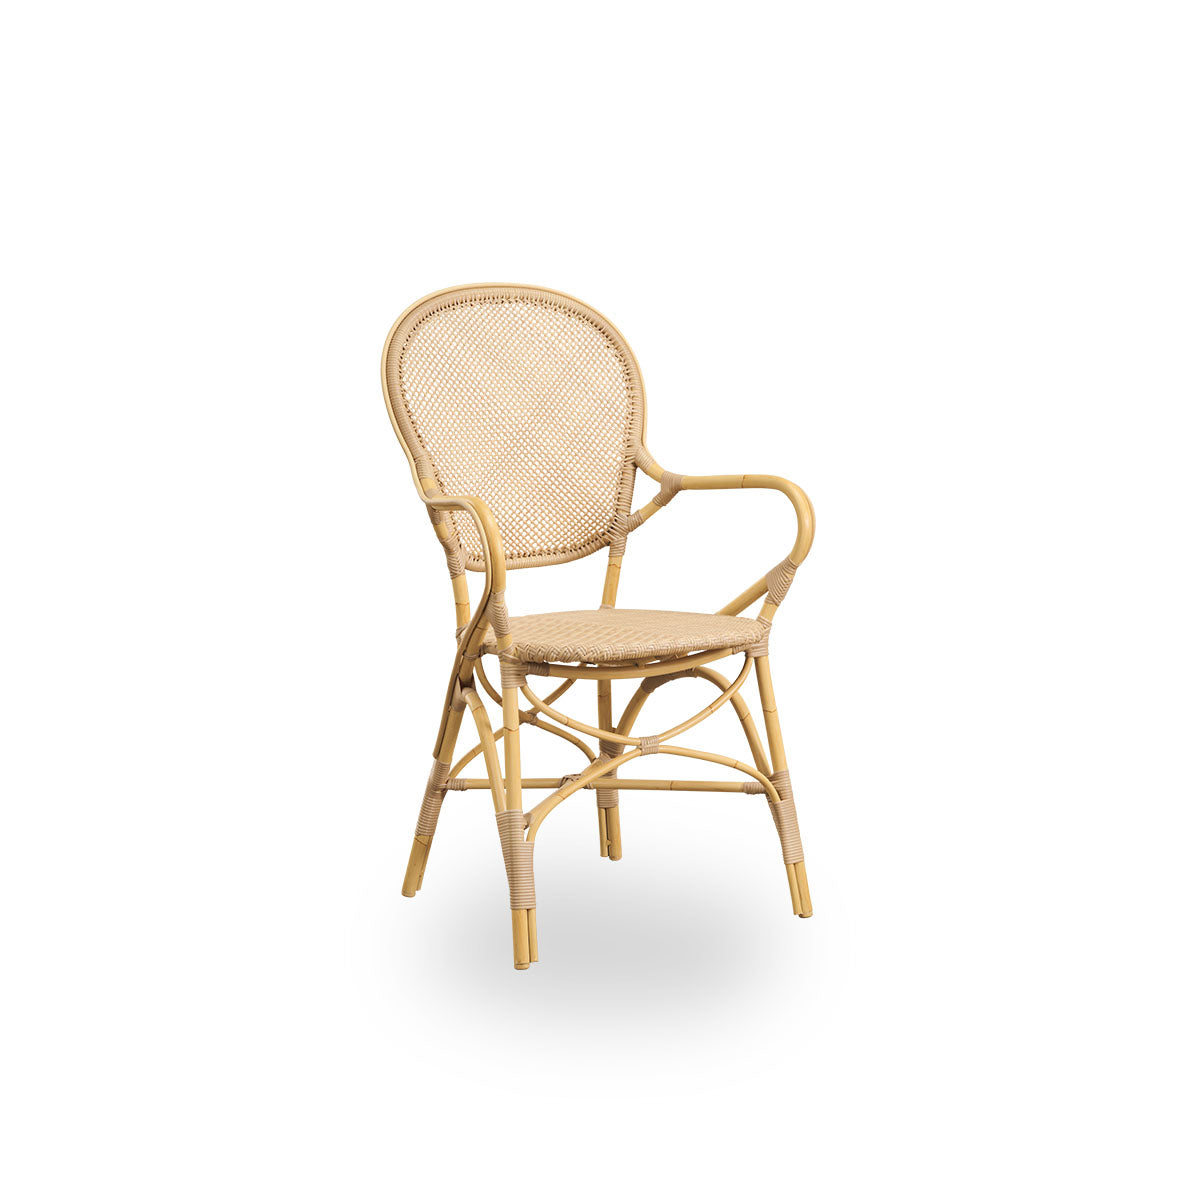 Rossini Exterior Armchair by Sika